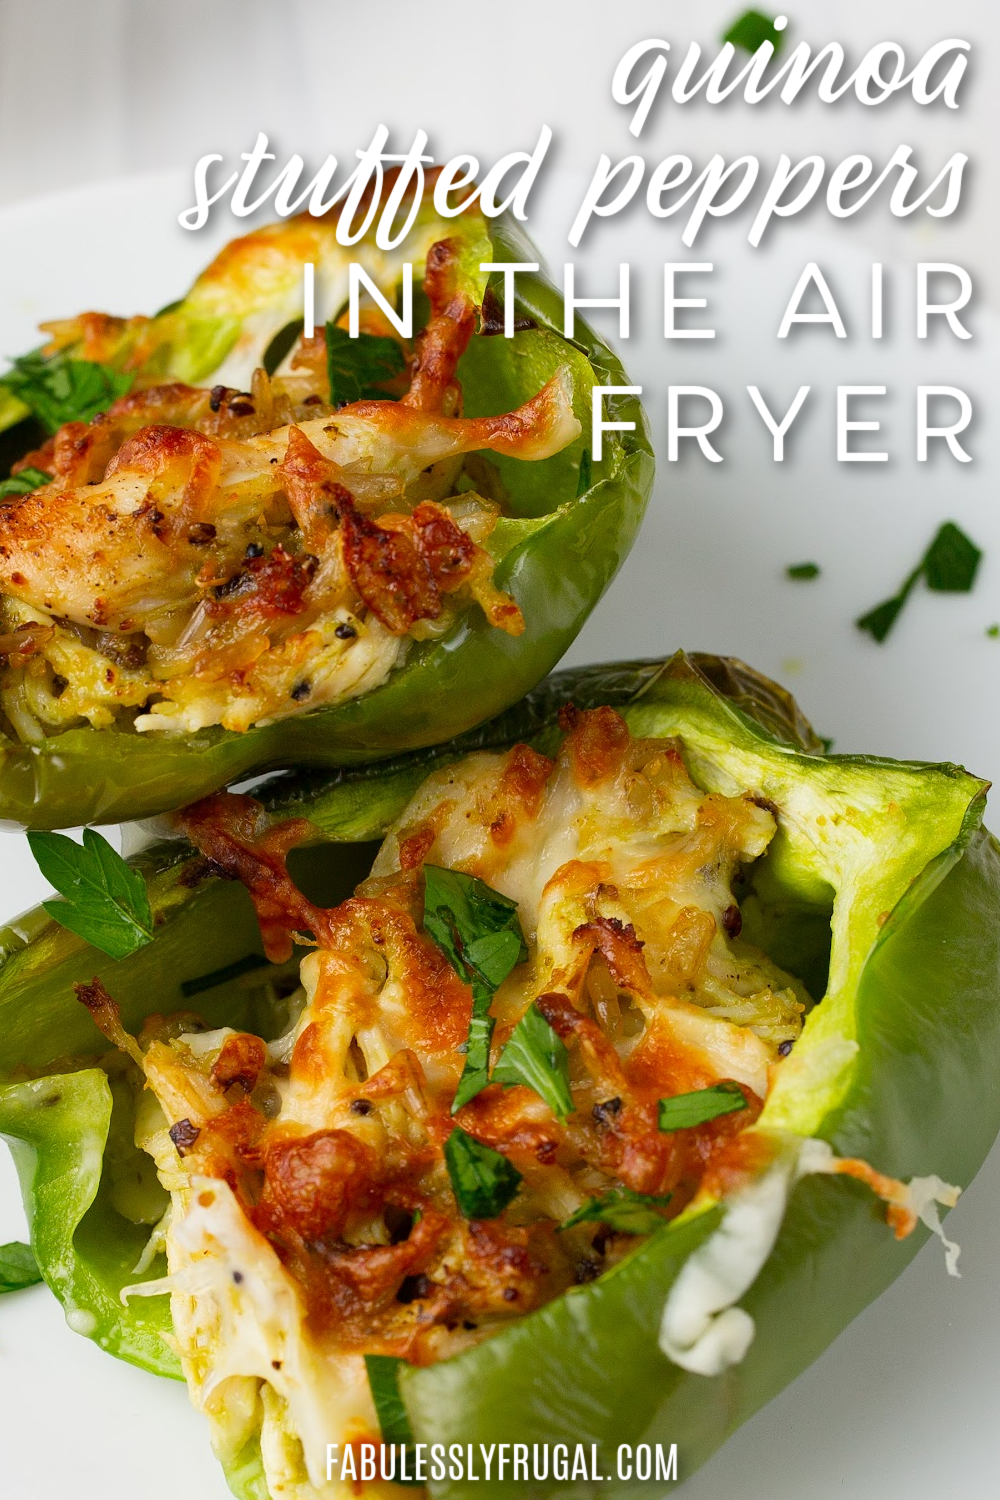 quinoa stuffed peppers in the air fryer